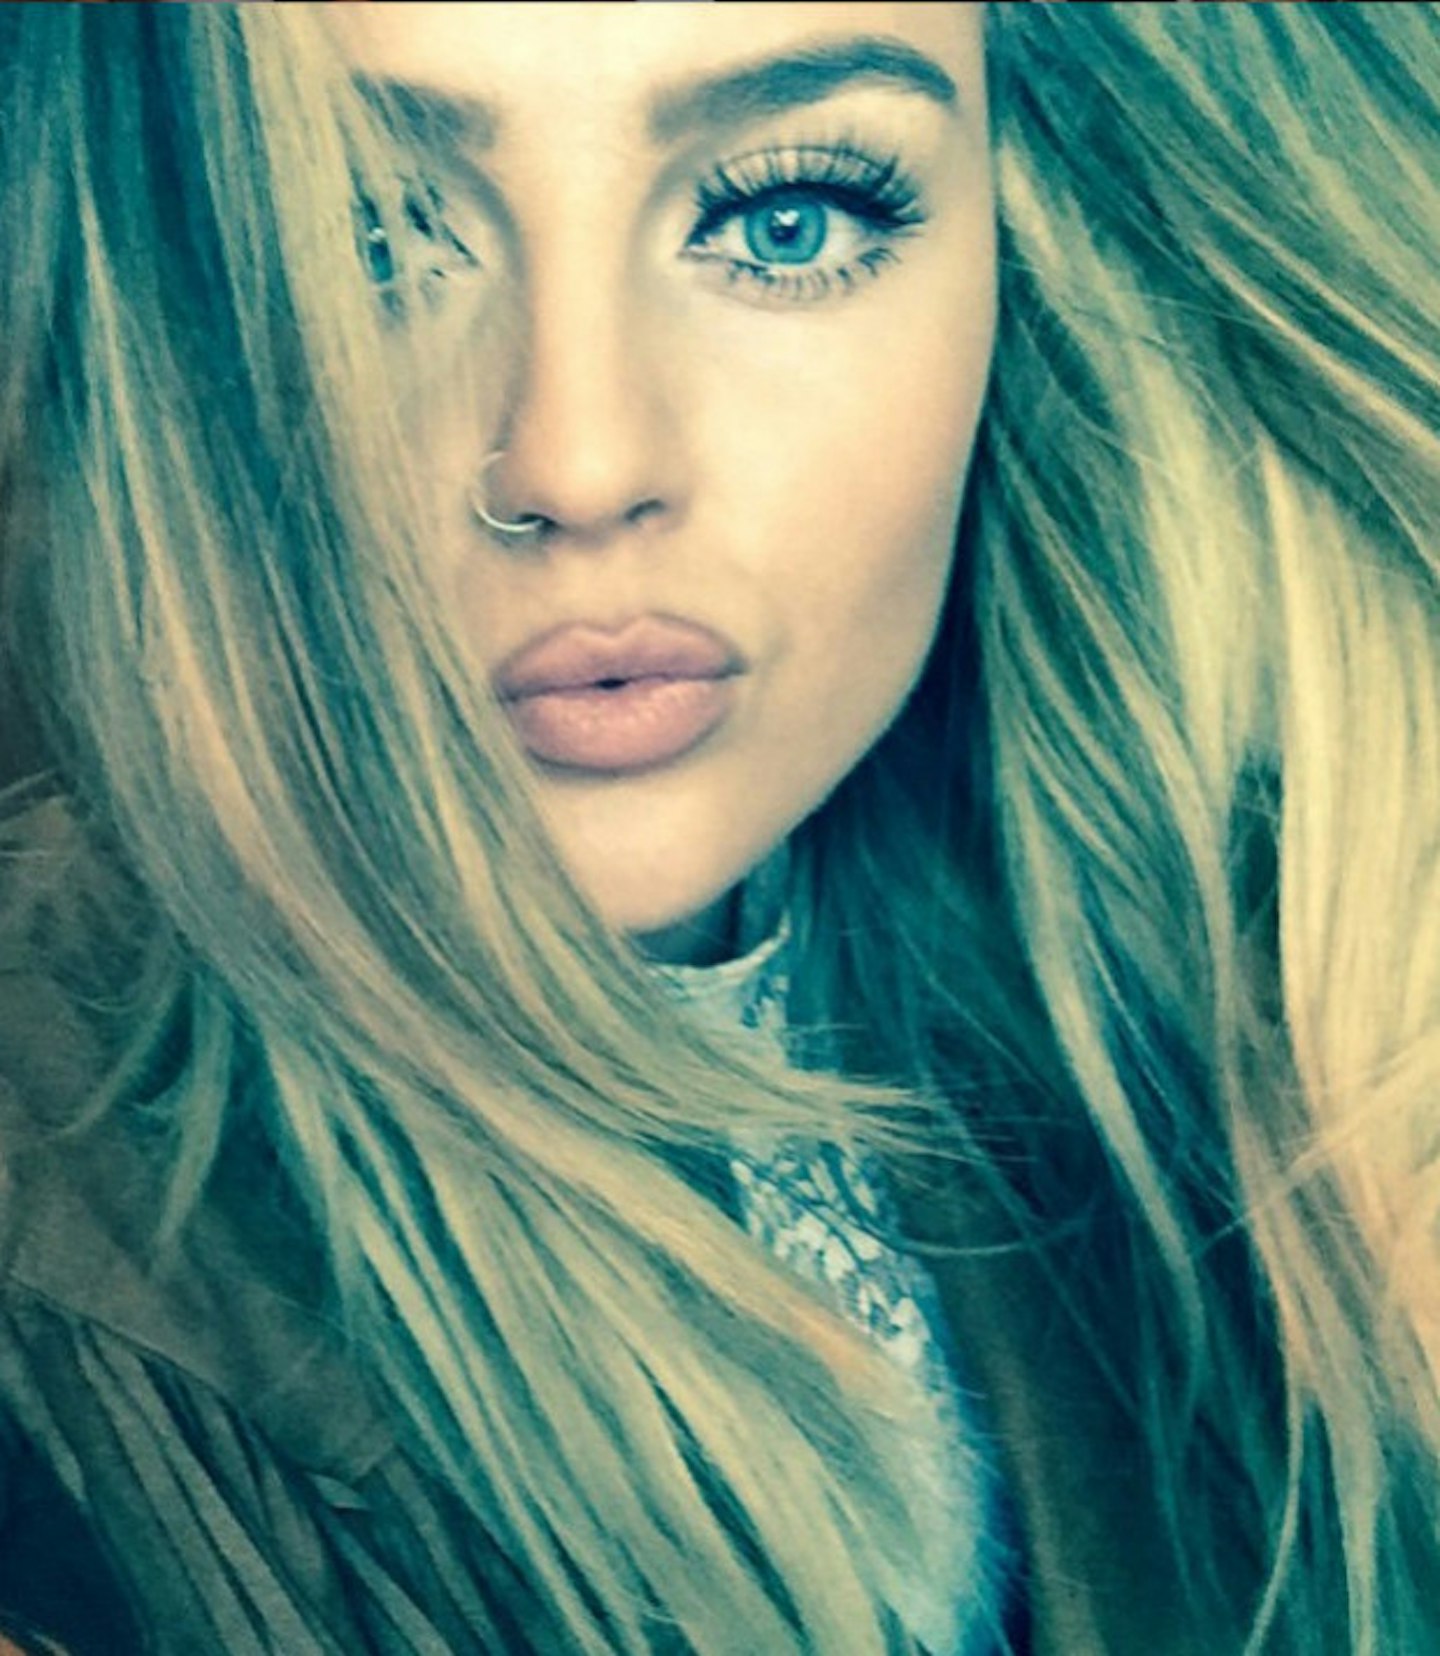 Perrie Edwards pout